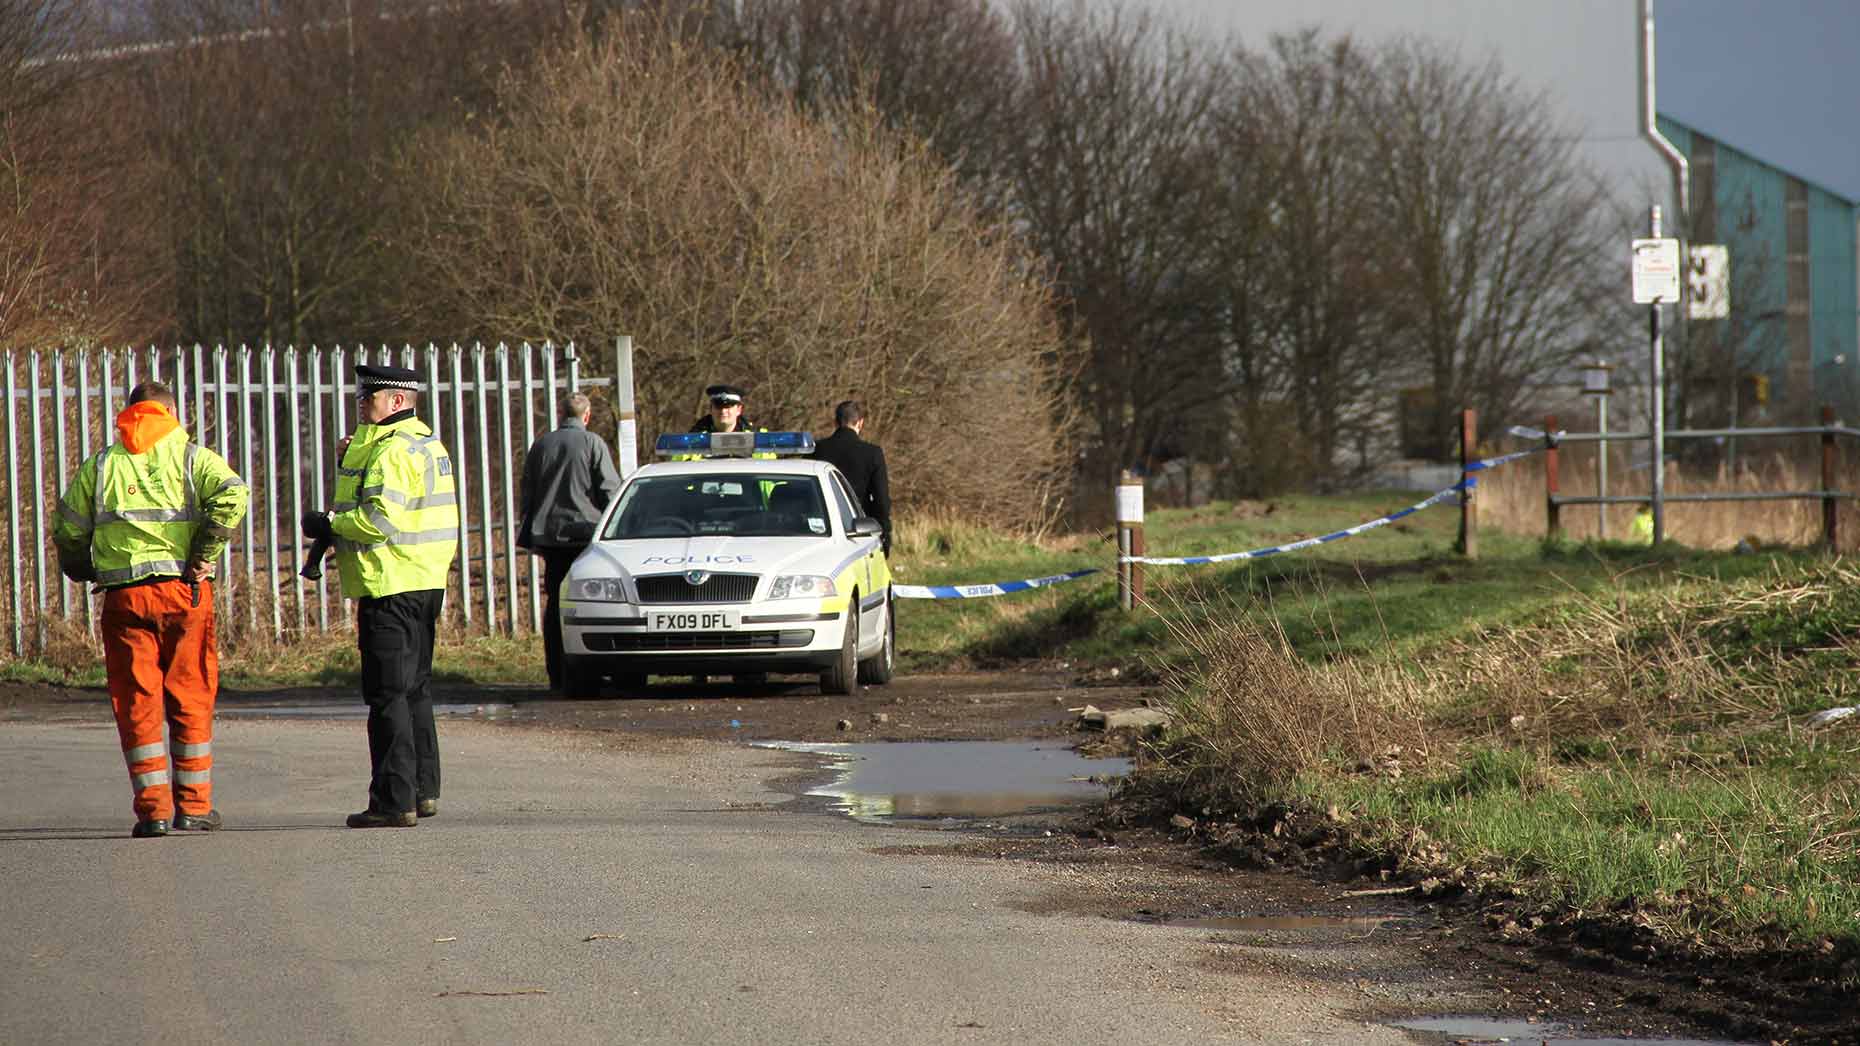 Police carrying out investigations at the scene on February 9, 2014. Photo: E Norton for The Lincolnite